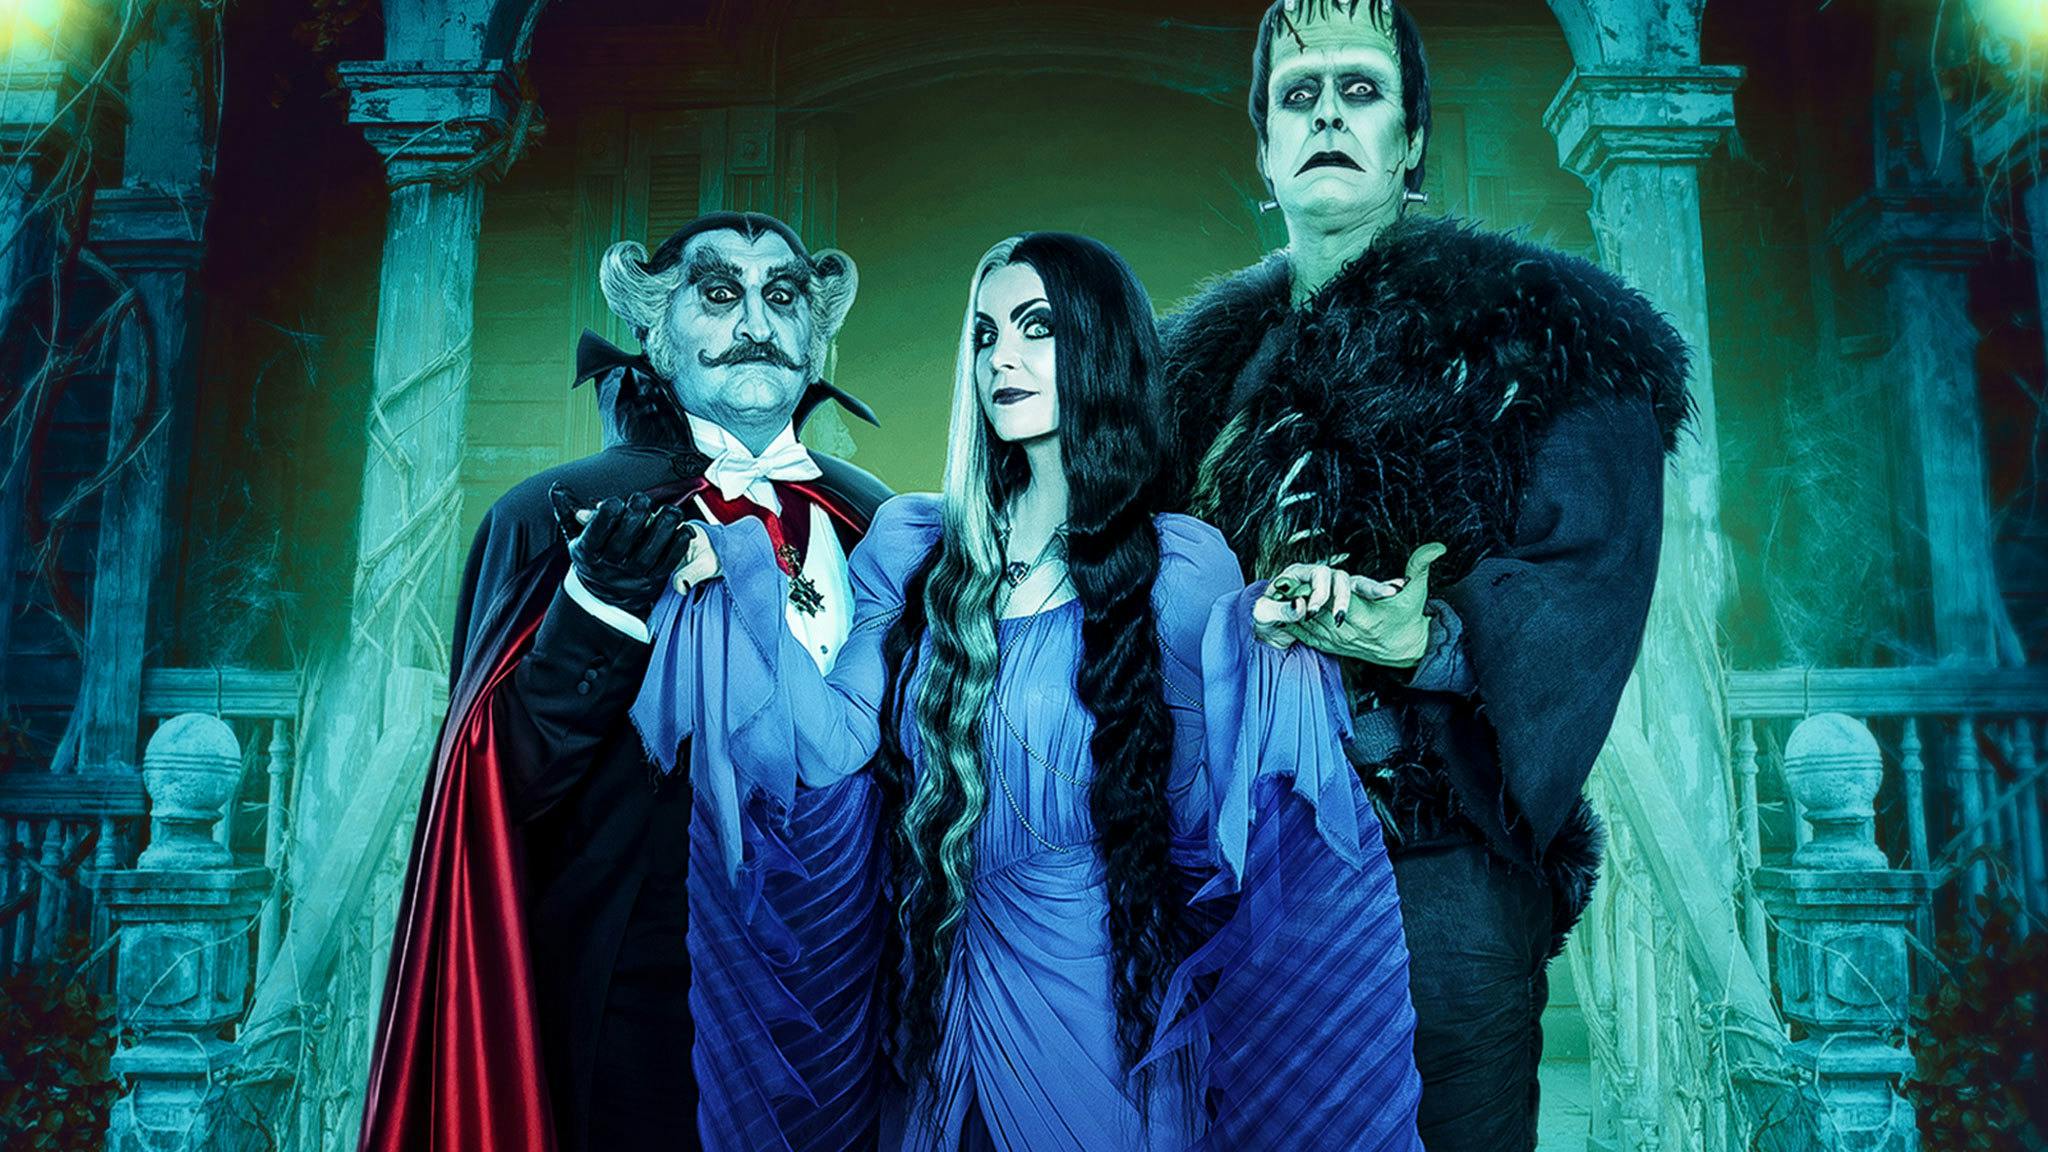 Here’s the first official poster for Rob Zombie’s The Munsters